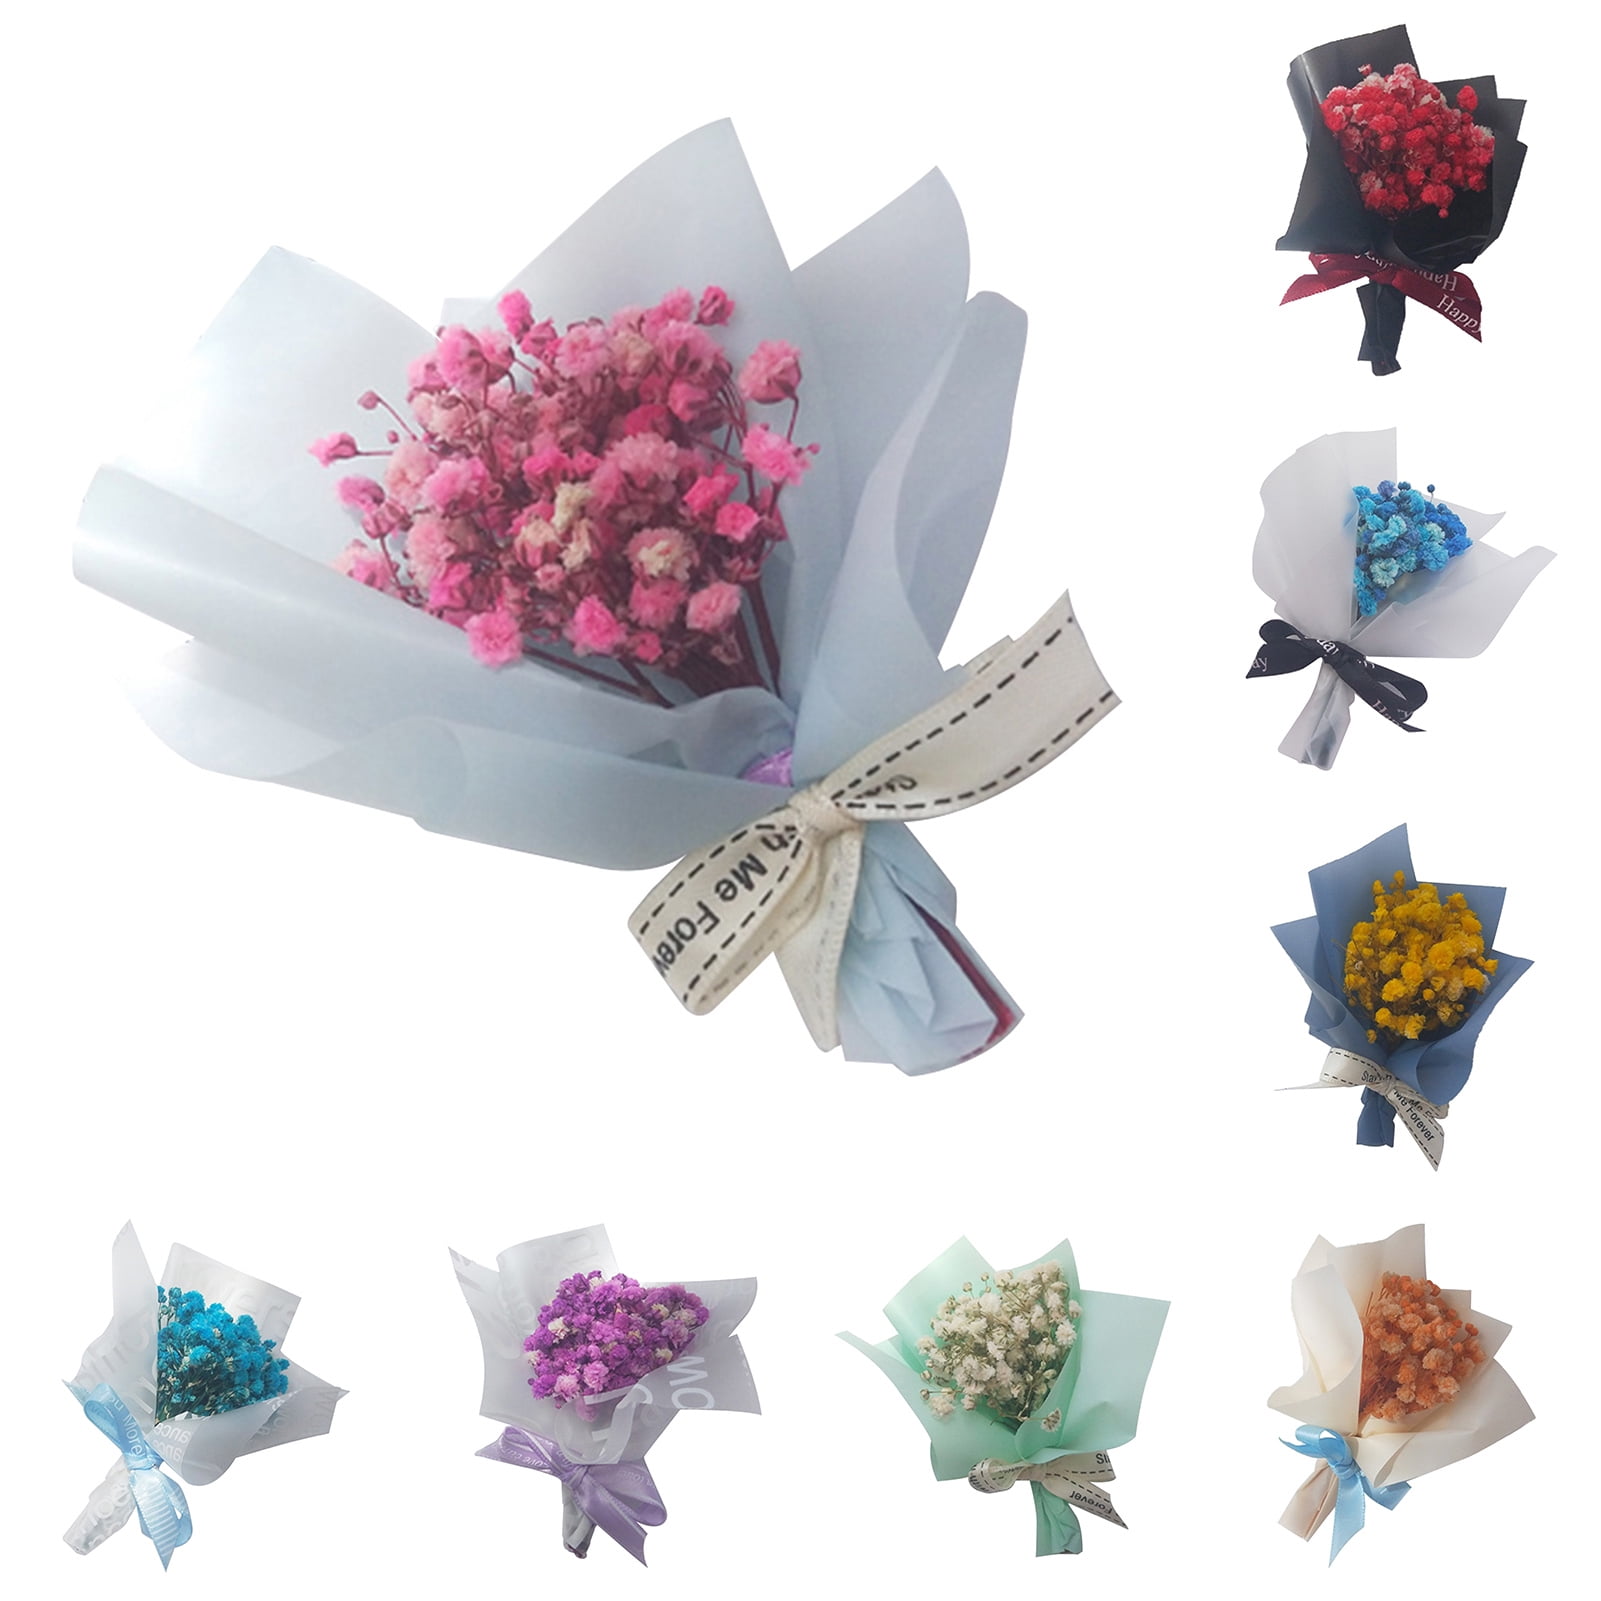 Home Small Fake Flowers Exquisite Dried Flower Bouquet Art Plants For  Wedding Favors Party Decoration Photography Props 4mf Ff From Sd003, $1.45